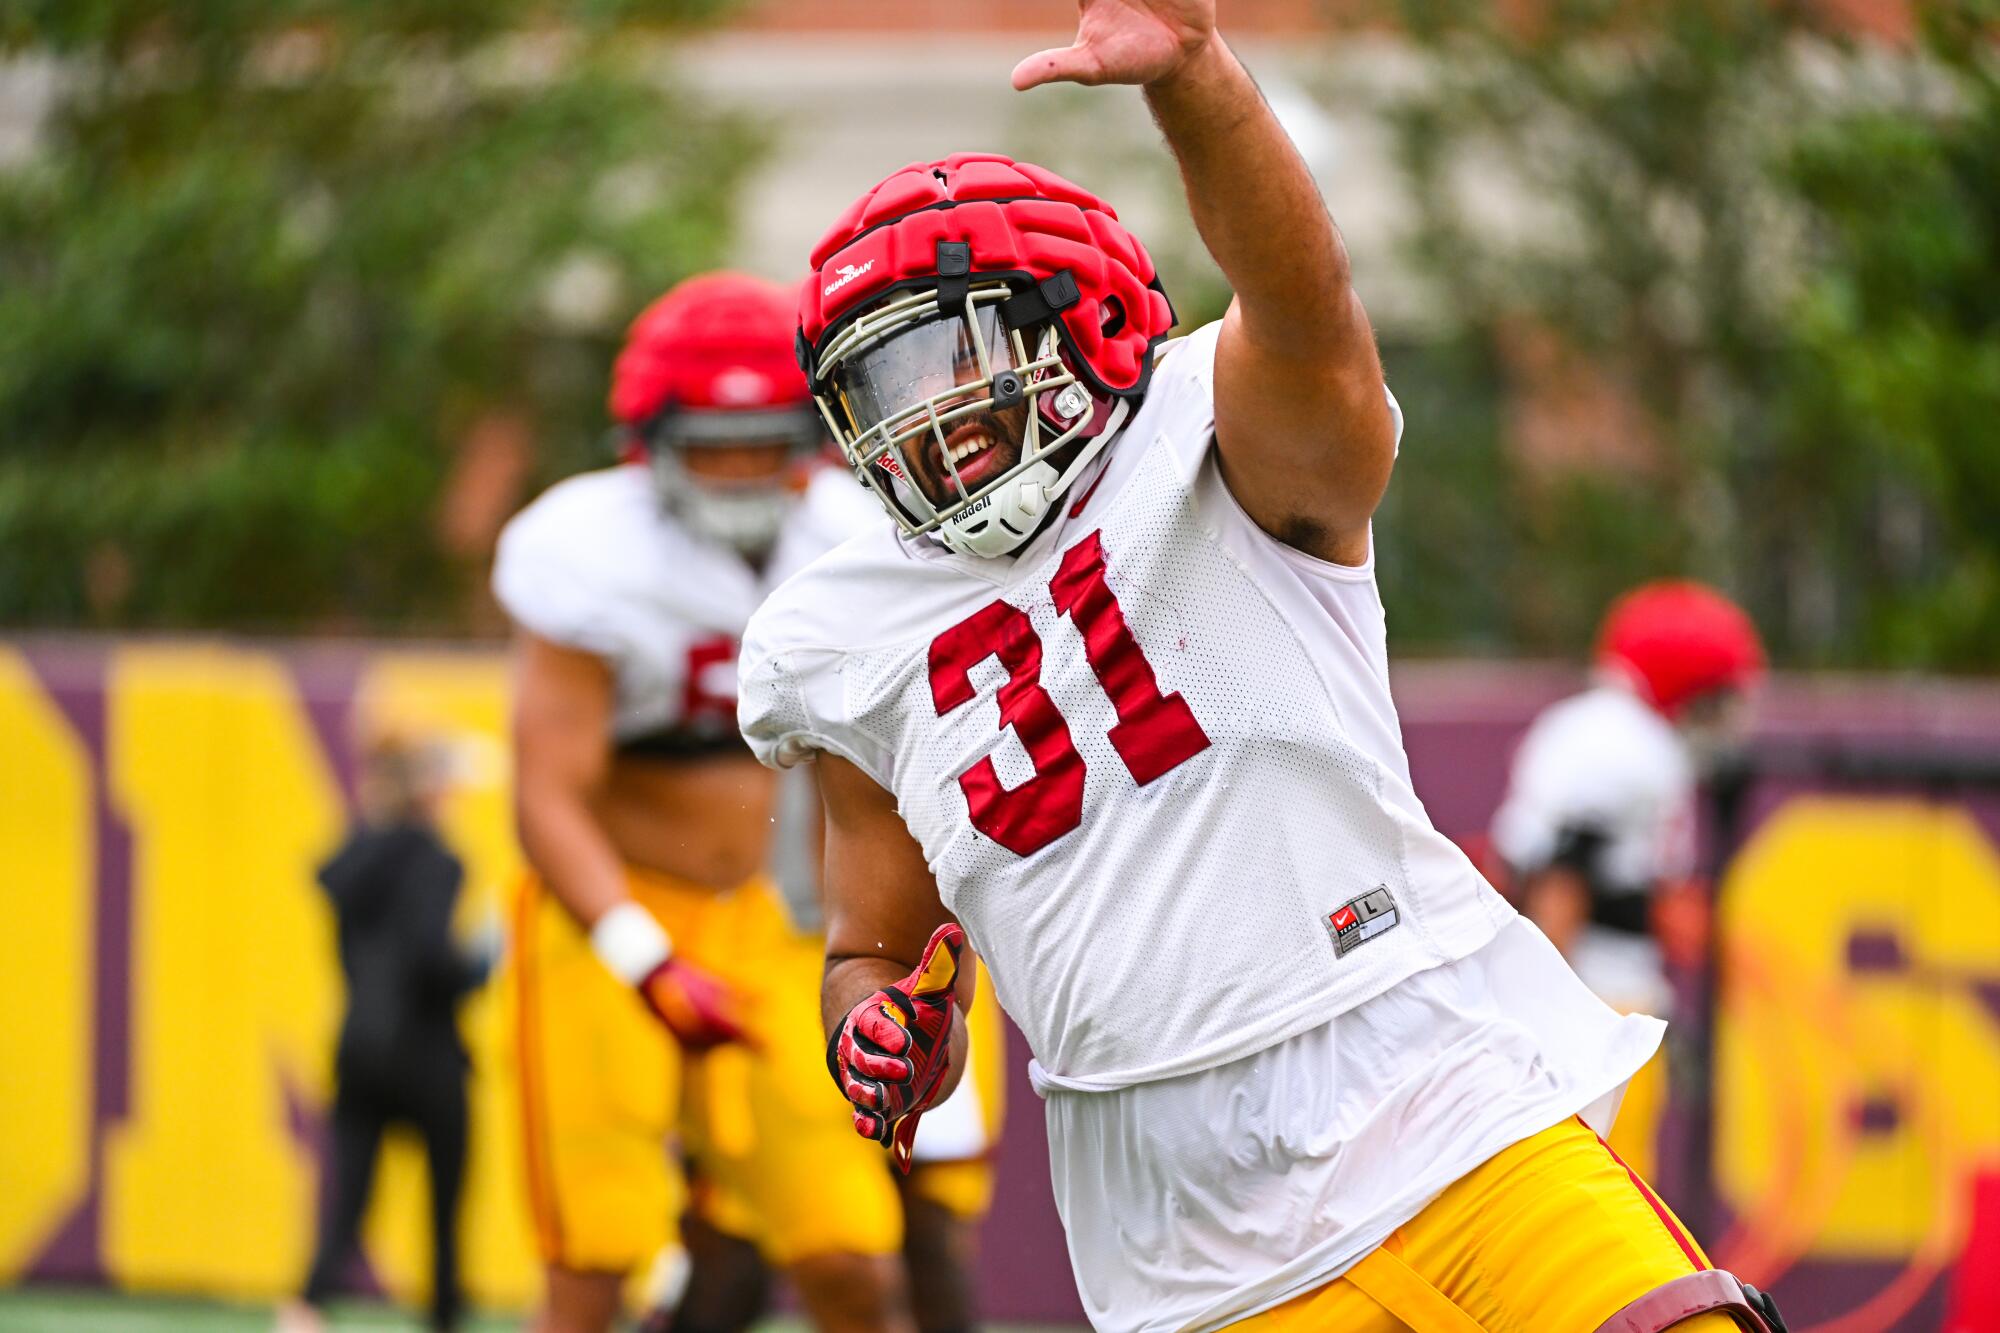 USC defensive lineman Tyrone Taleni participates in a team practice session on March 31, 2022.